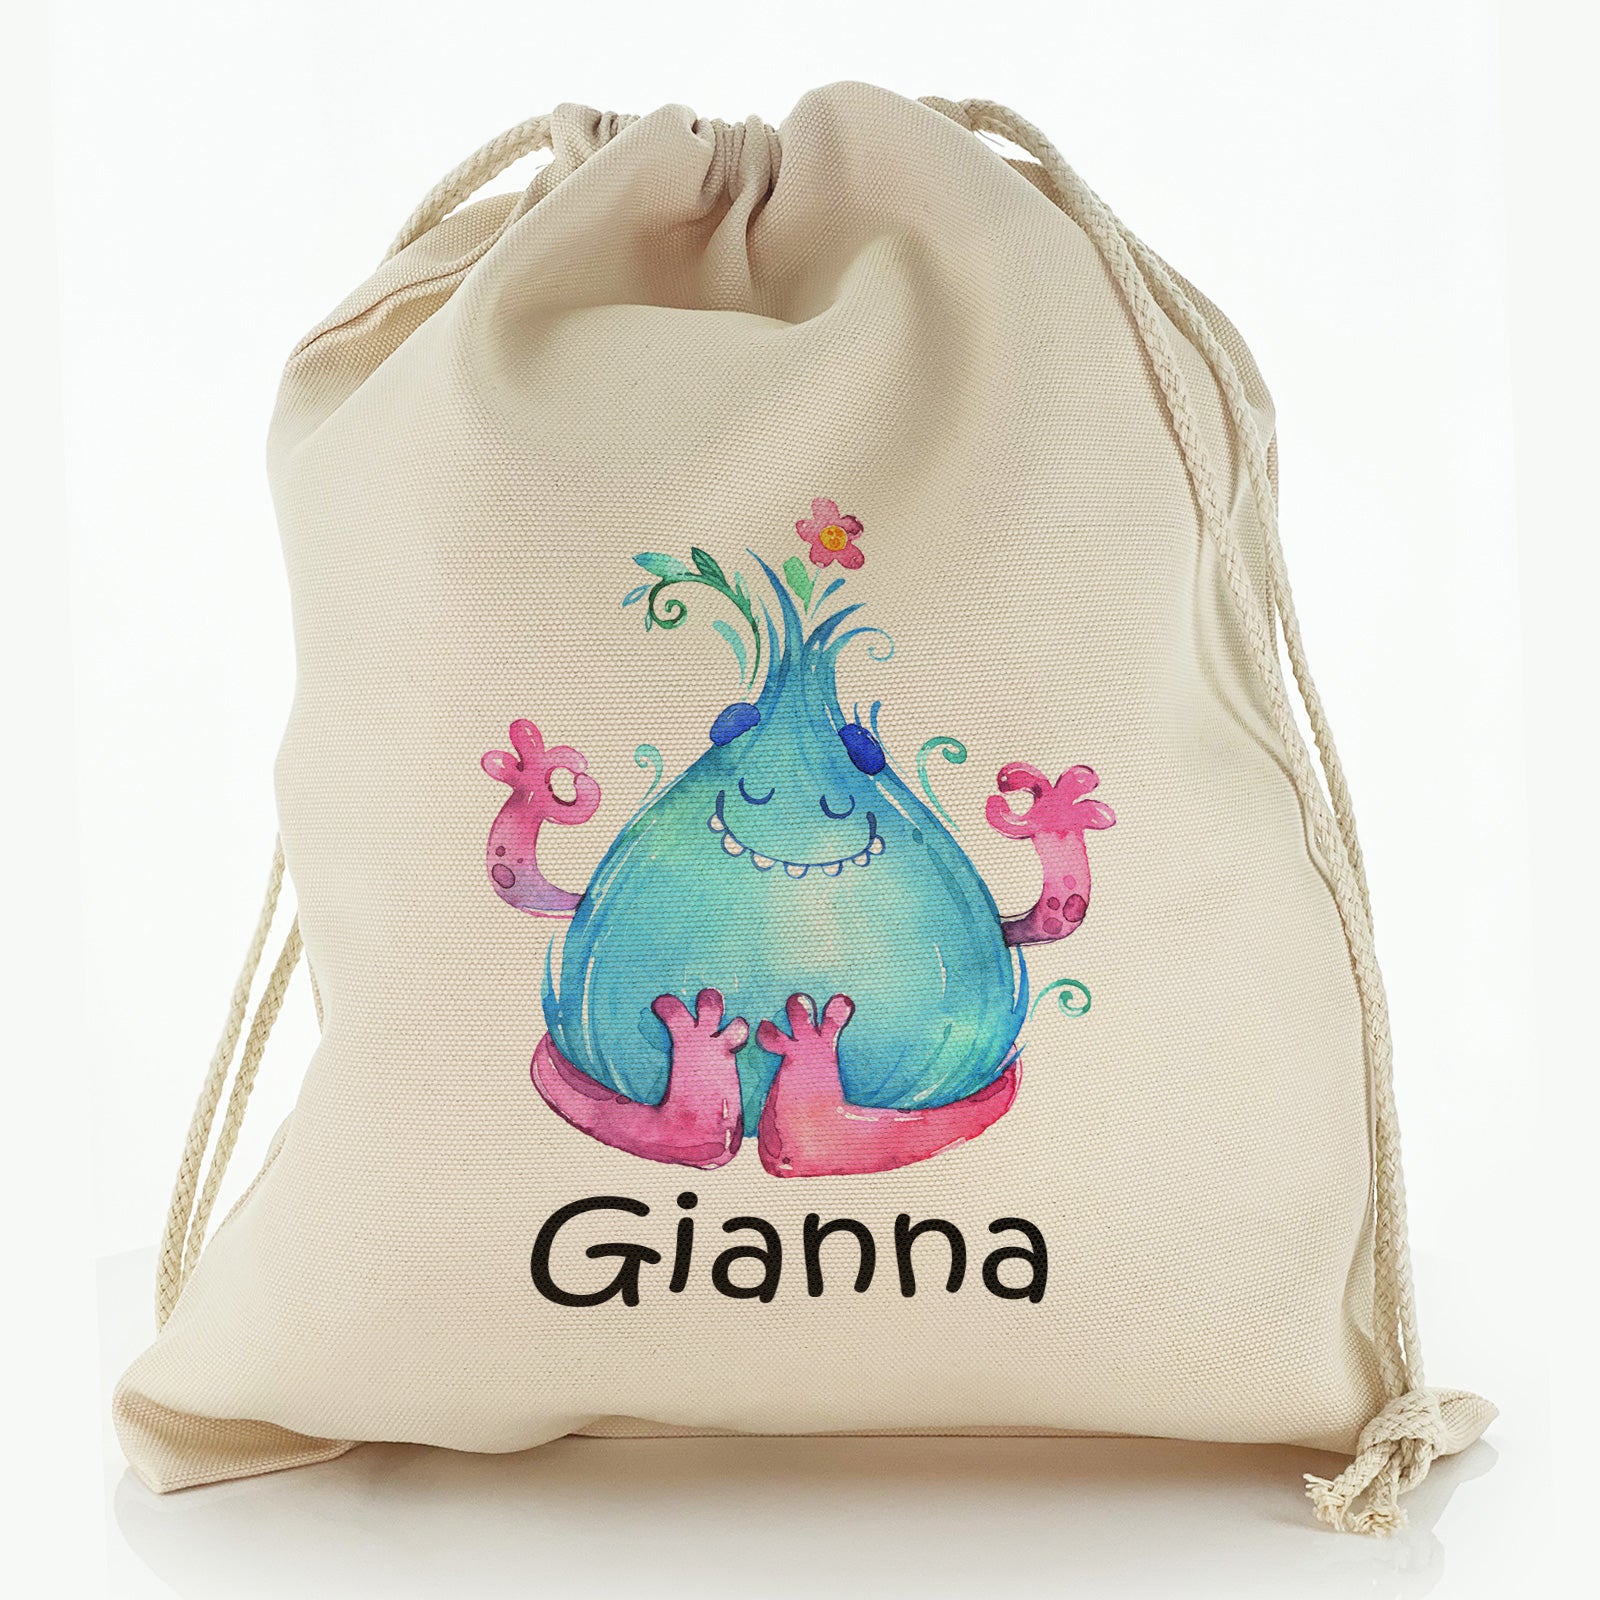 Personalised Canvas Sack with Childish Text and Blue Flame Monster